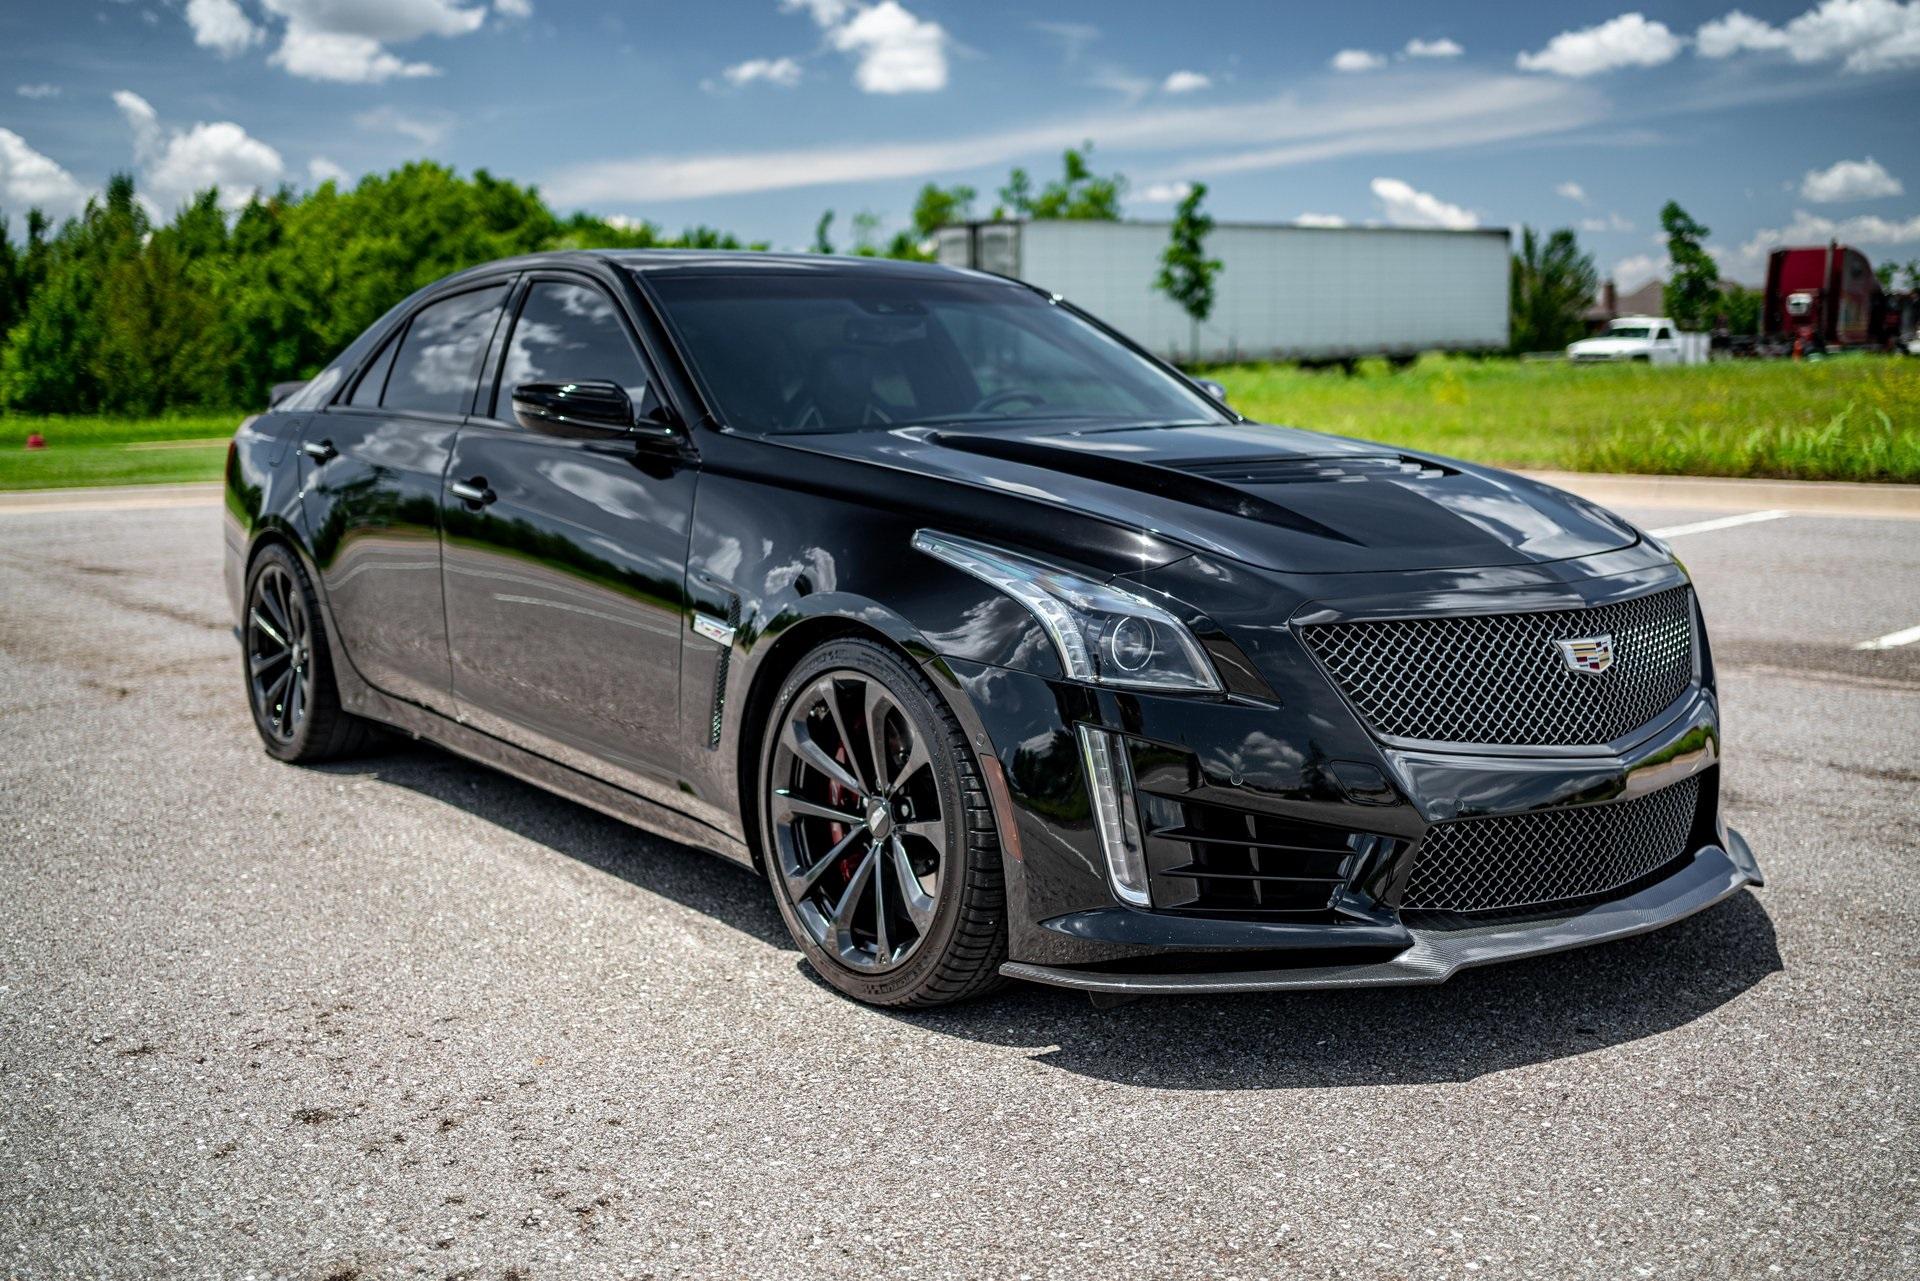 2018 Cadillac Cts V Championship Edition Headed To Auction